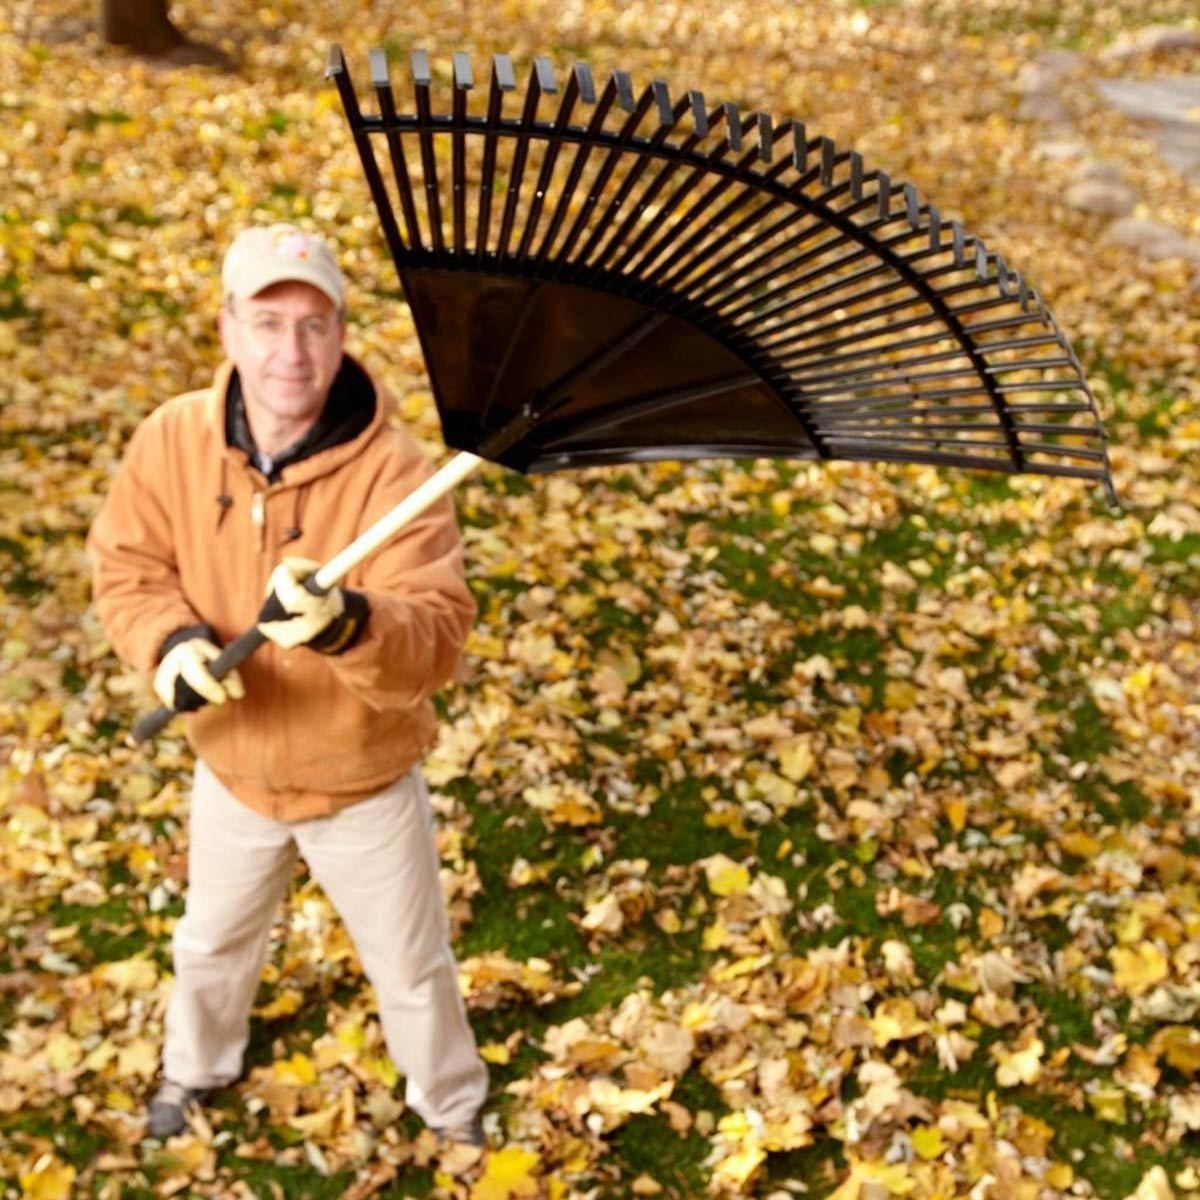 Should You Be Raking Leaves or Leaving Them?